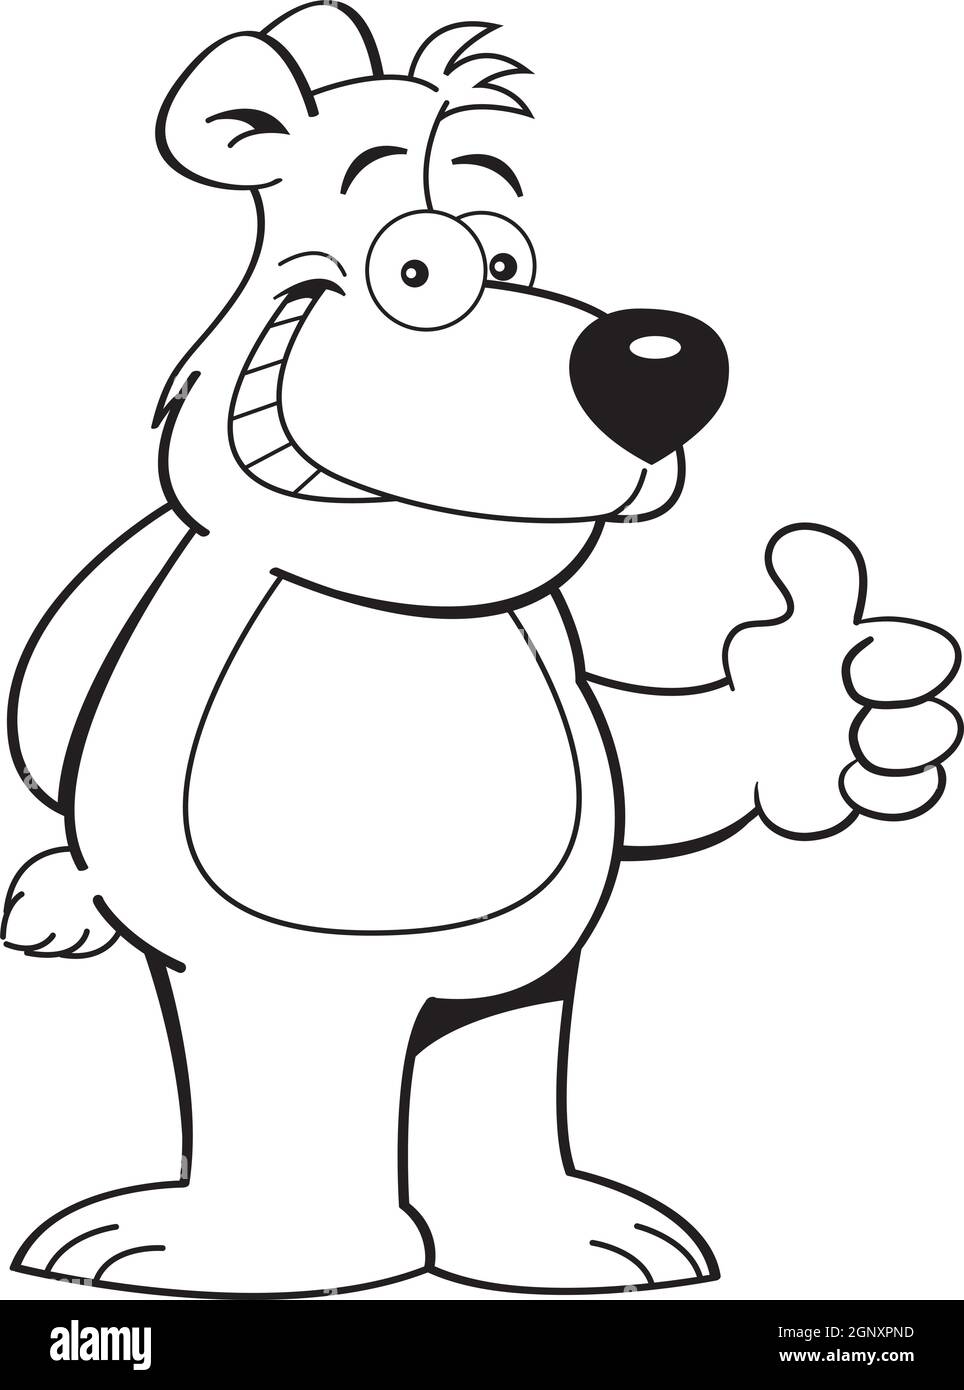 Black and white illustration of a teddy bear giving the thumbs up sign. Stock Vector